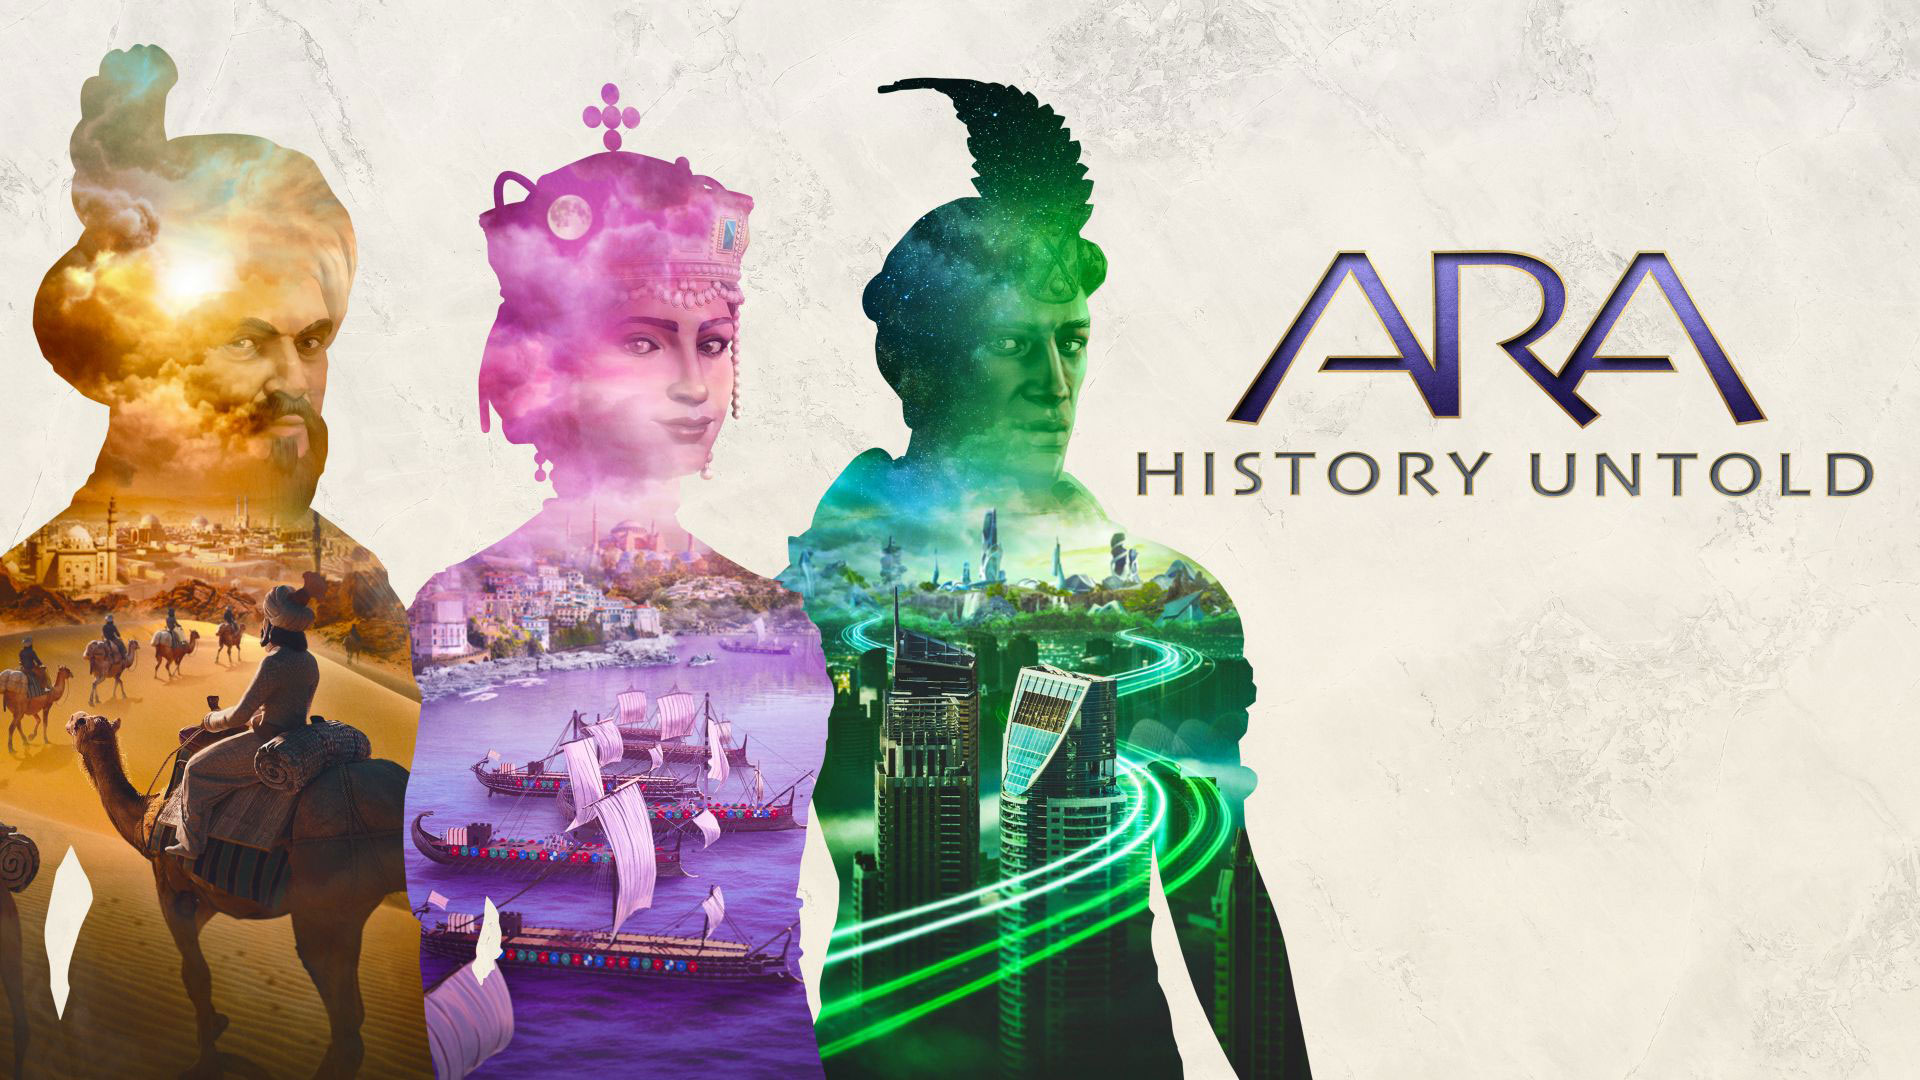 Ara: History Untold is looking to evolve the genre of historical grand strategy